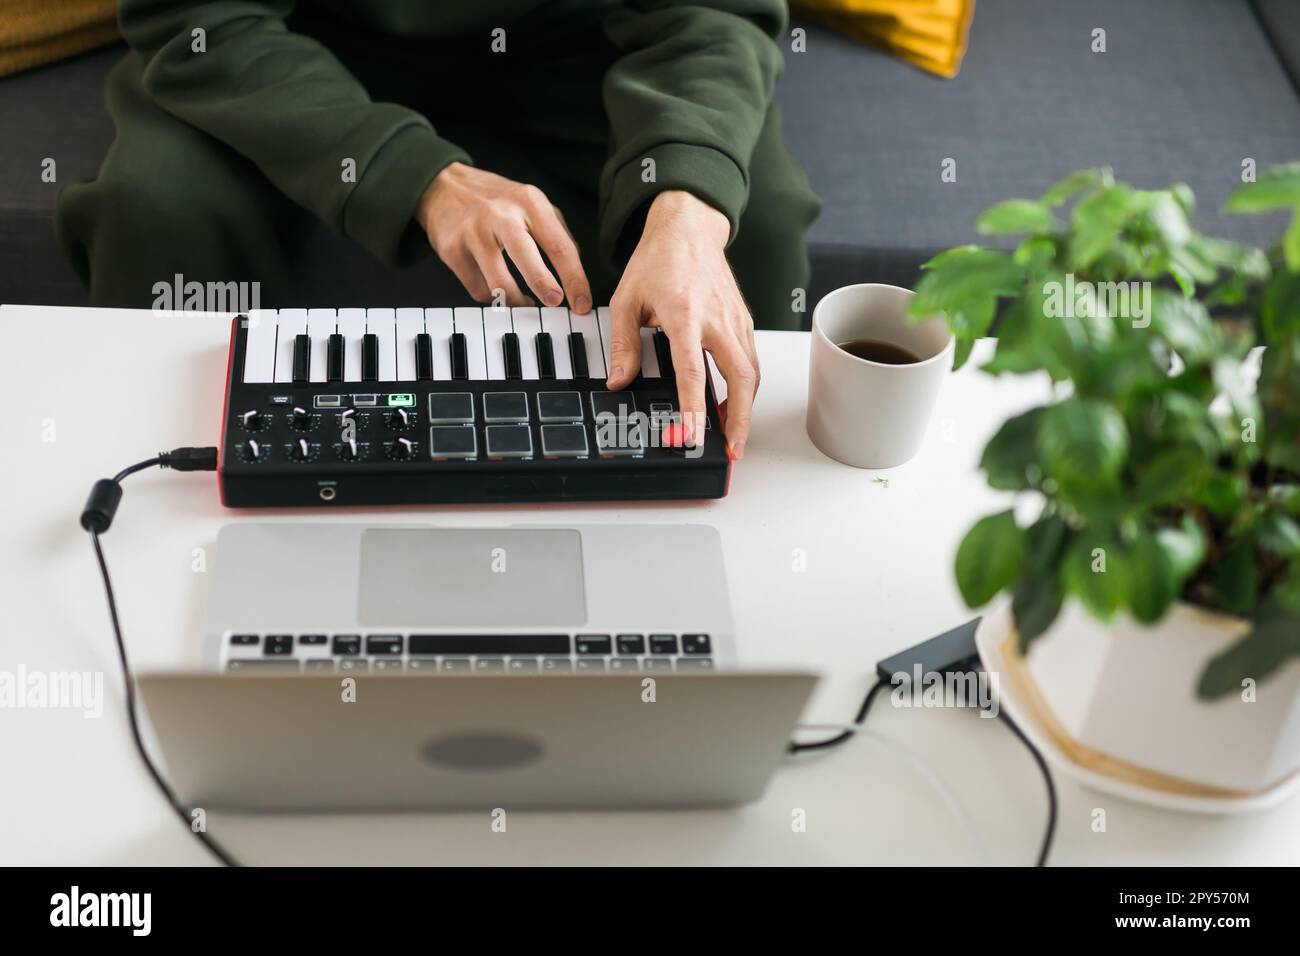 Top view of music producer or arranger using laptop and midi keyboard and other audio equipment to create music at home studio. Beat making and arranging audio content and composing song concept Stock Photo